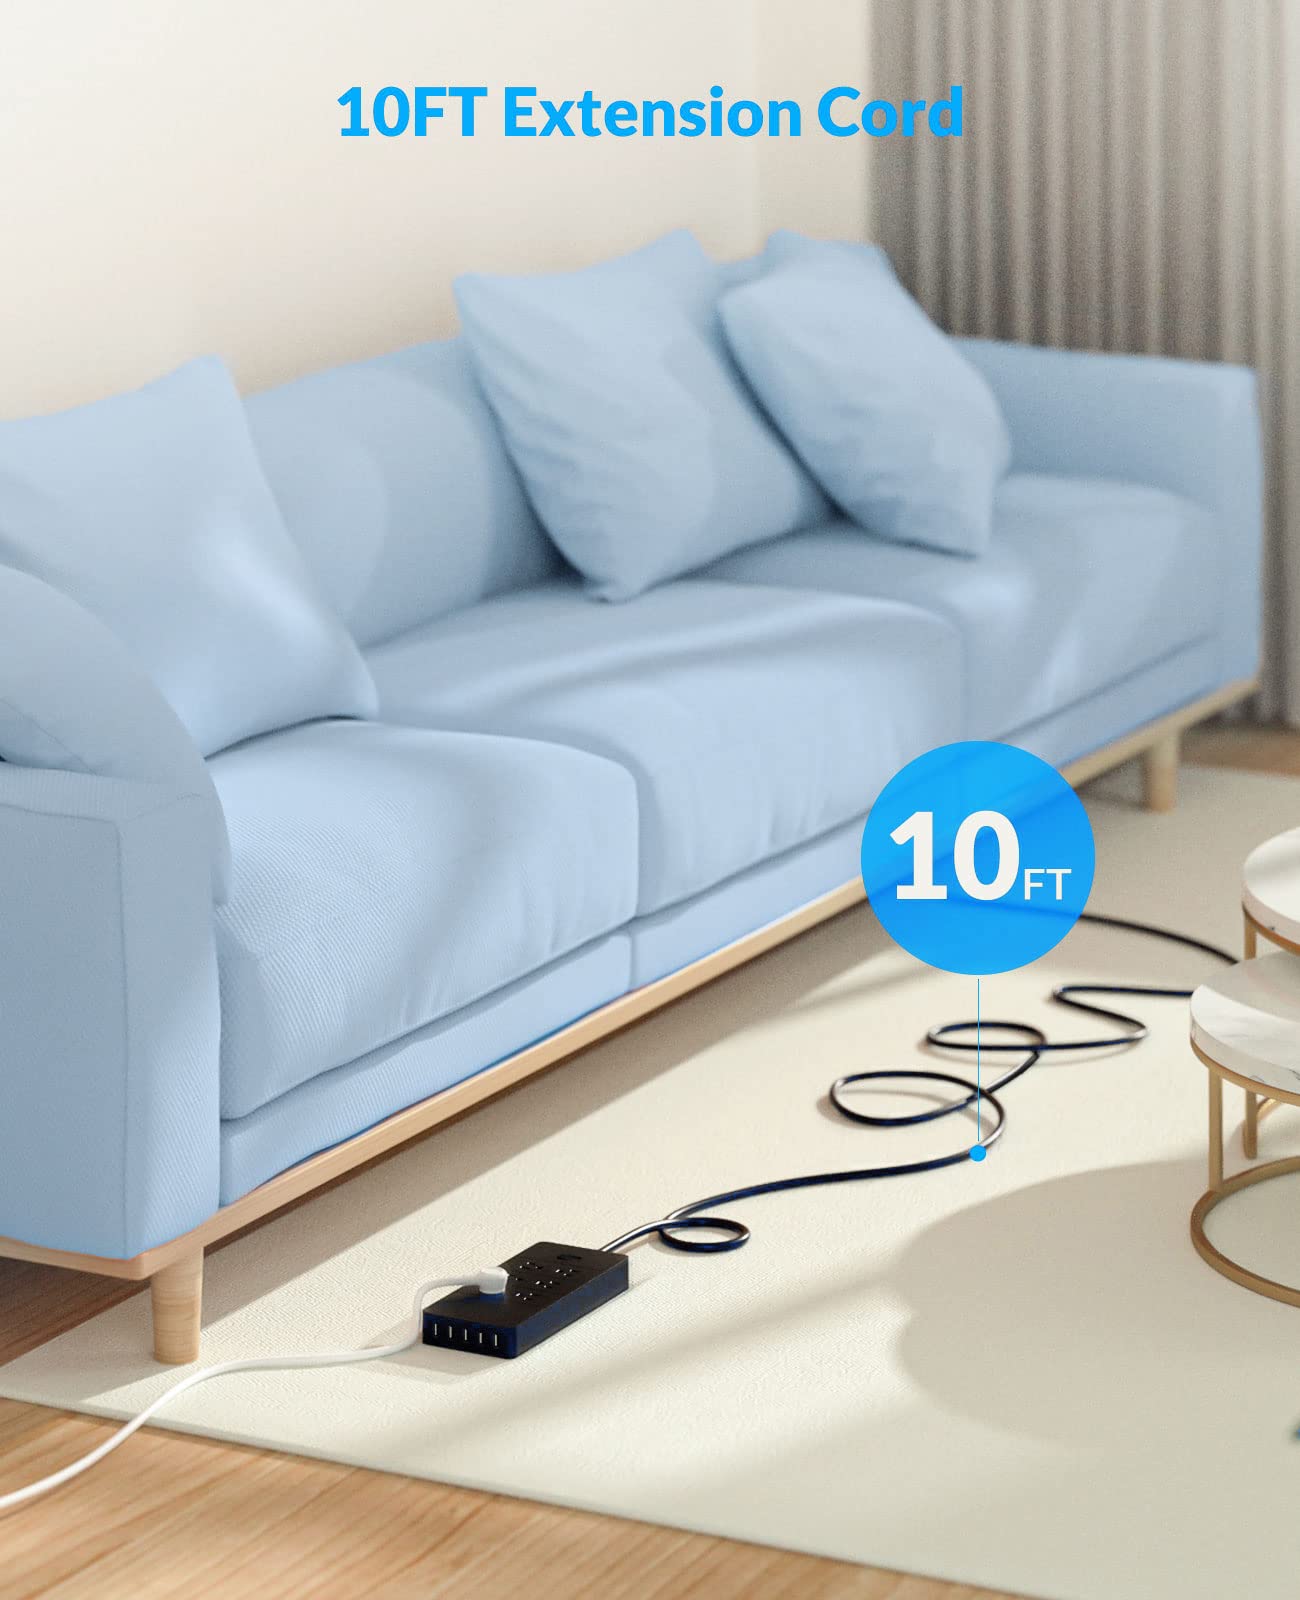 ORICO Power Strips with 6 Outlets & 5 USB Ports, Surge Protector Power Strip Flat Extension Cord 10 FT(1875W/15A), 1700 Joules for Home & Office Accessories, ETL Listed- Black